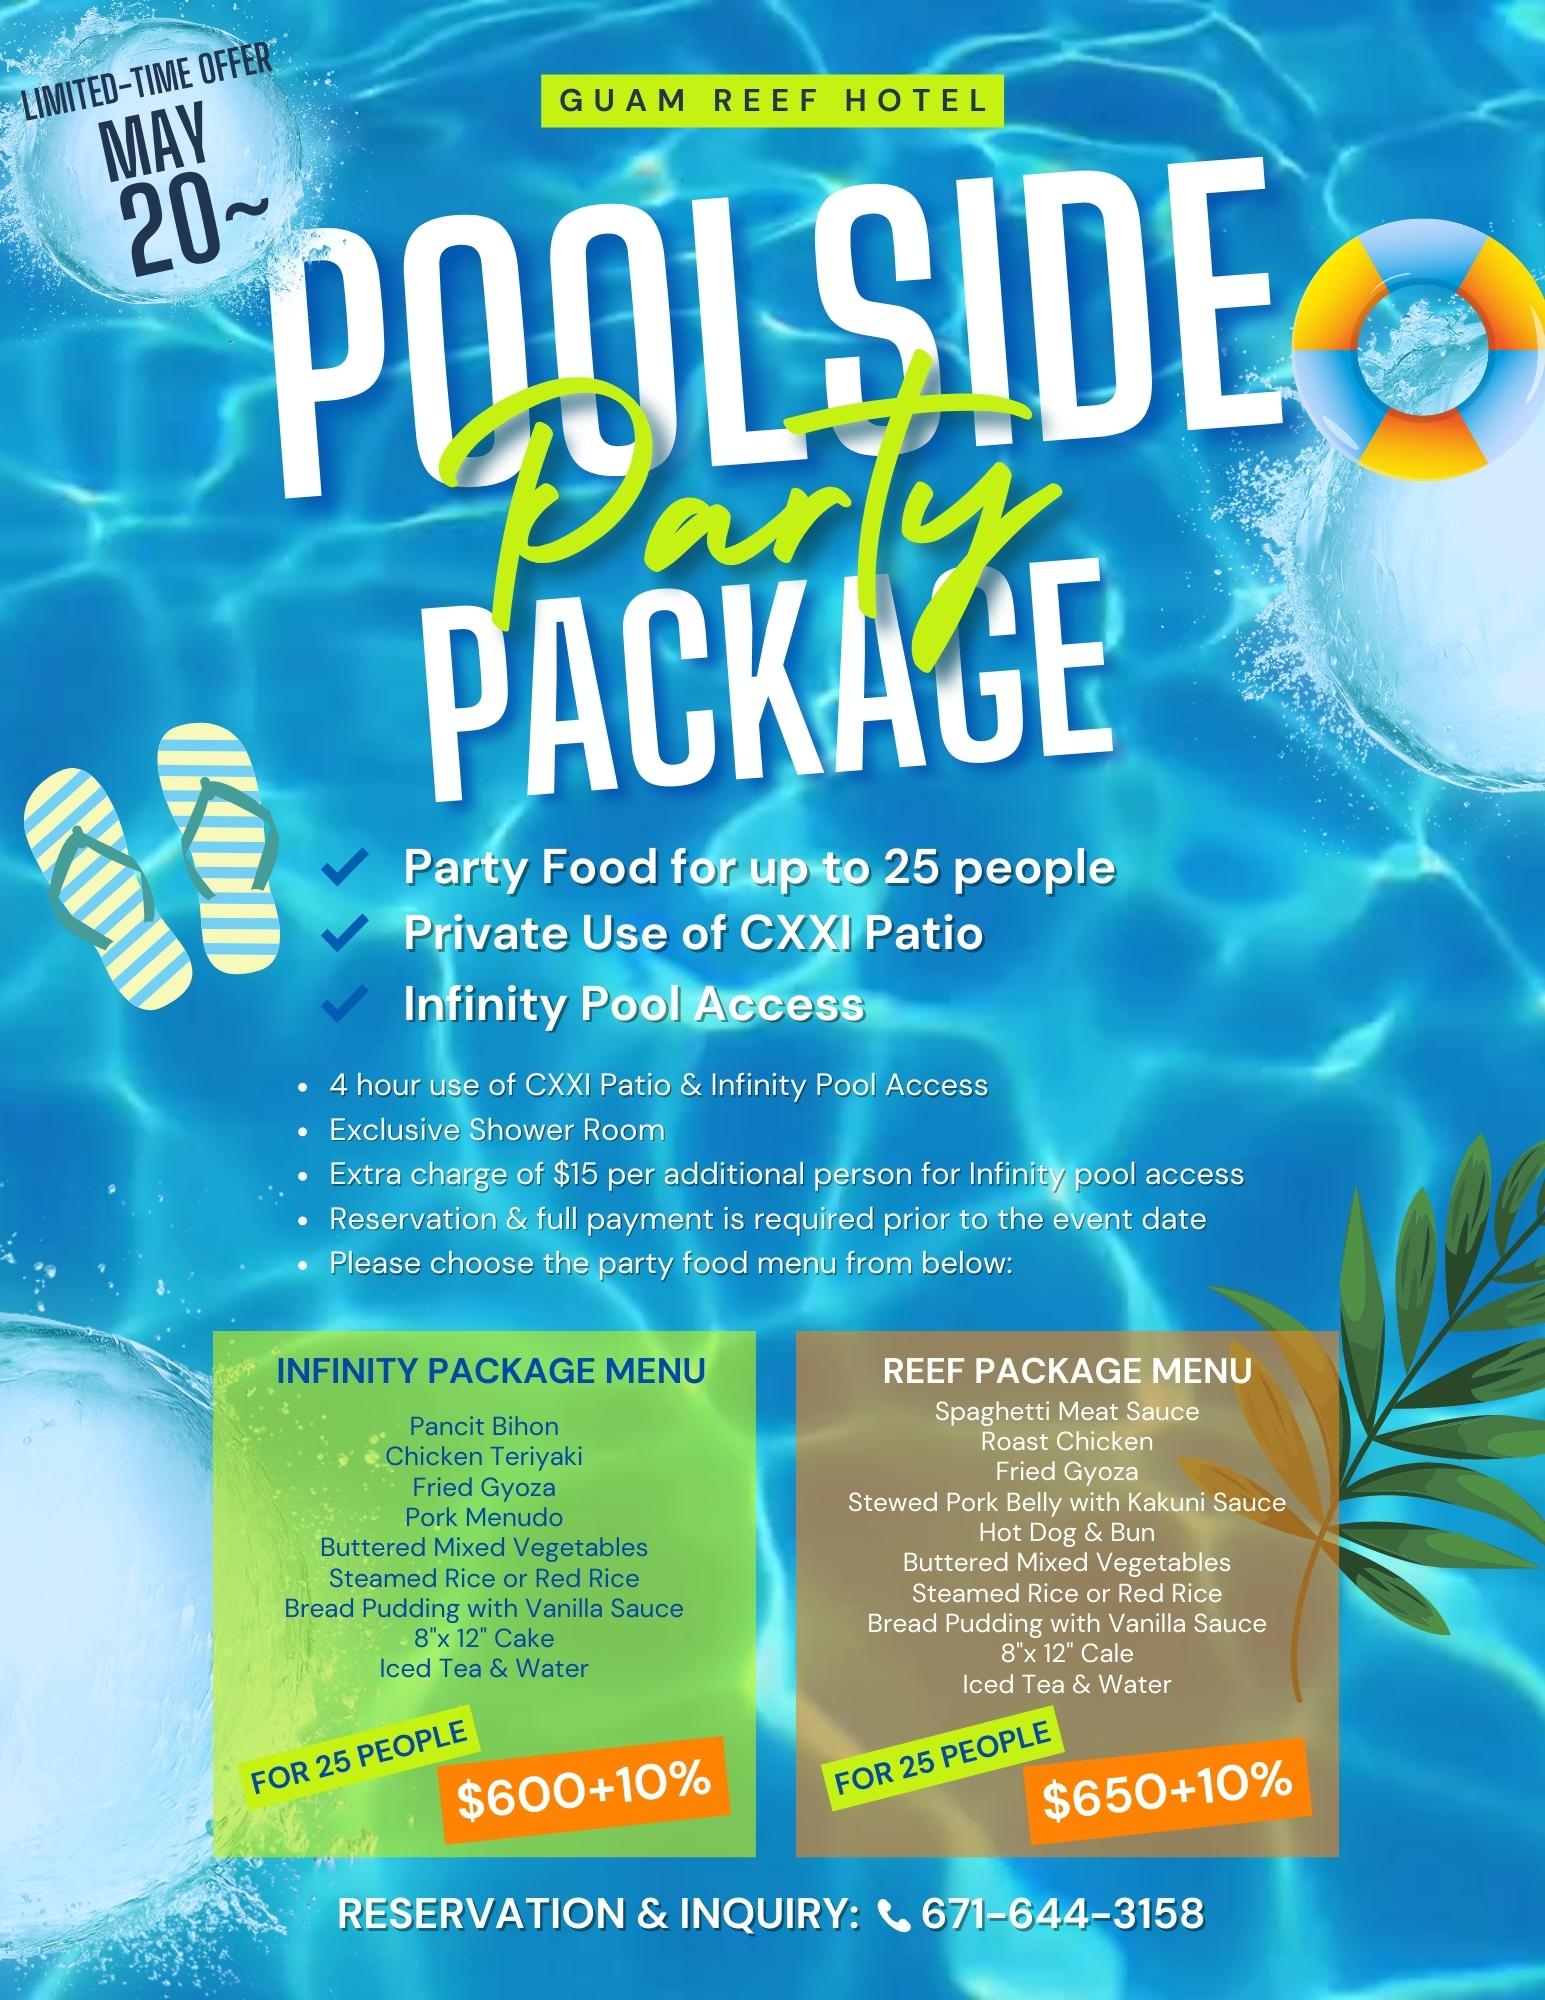 Book Your Own Pool Party With Us!!! [Limited-Time Offer Beginning on May 20, 2023]